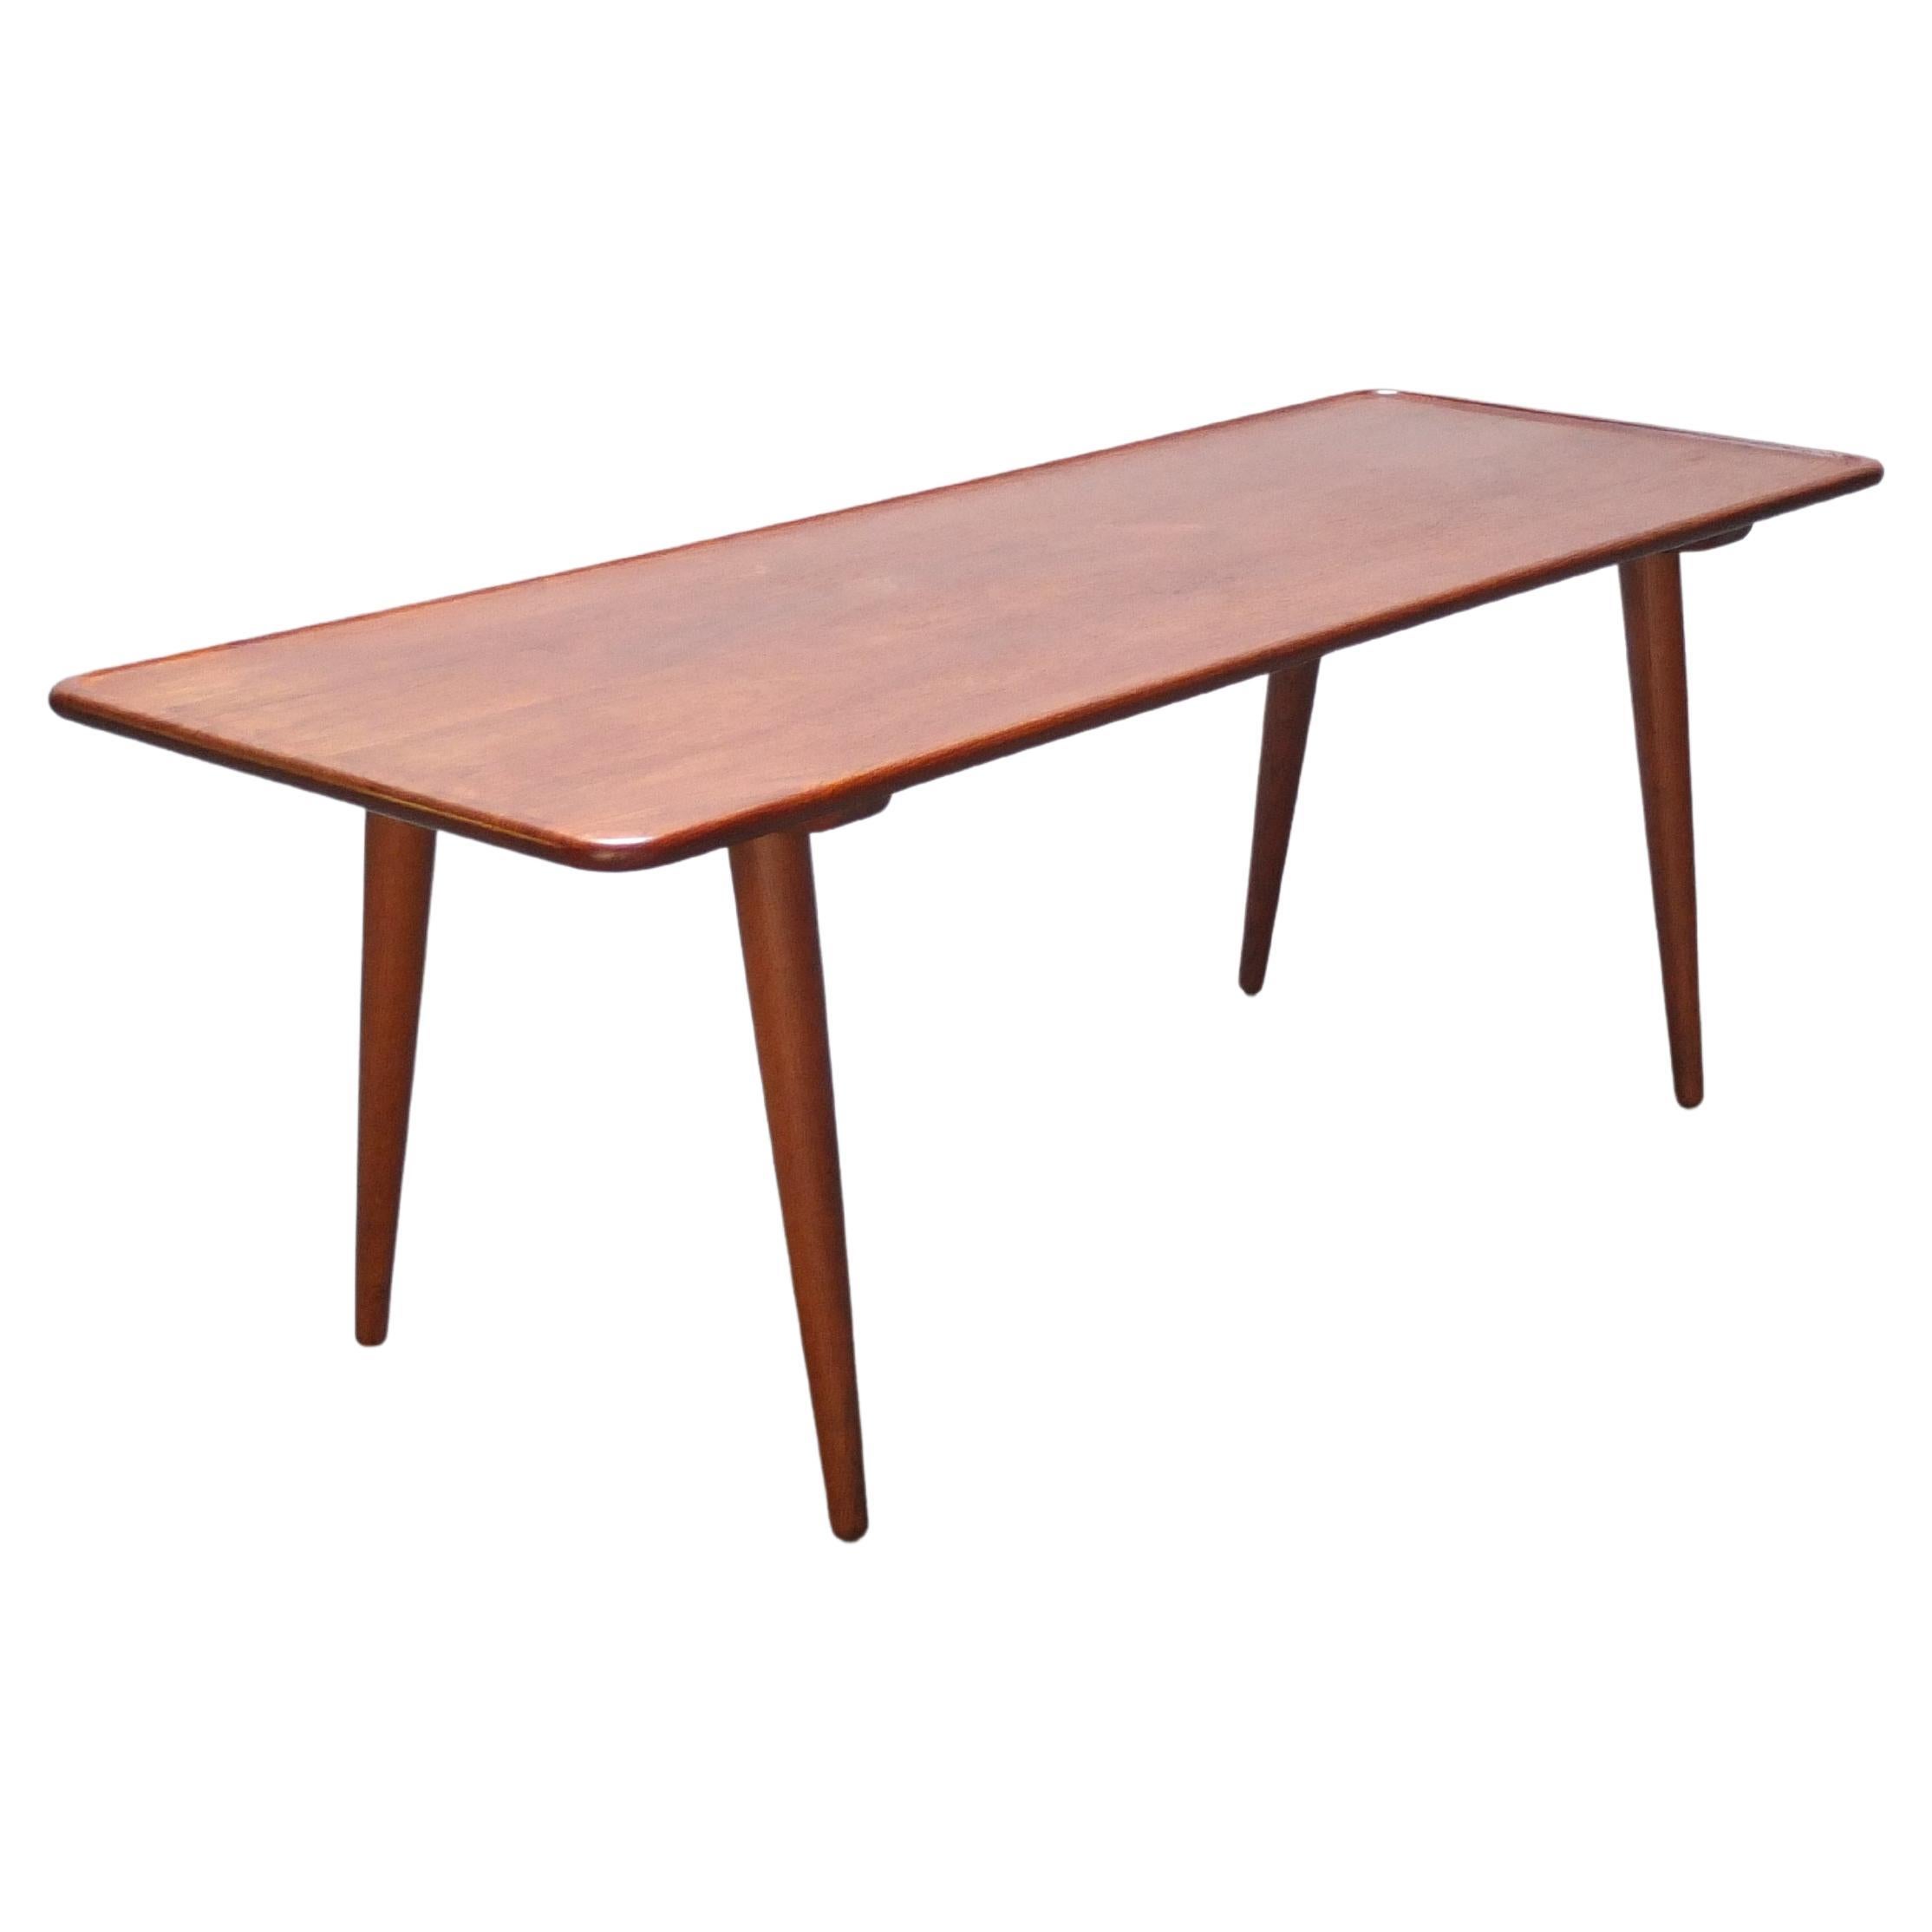 Teak & Oak 'At-11' Coffee Table by Hans Wegner for Andreas Tuck, 1950s For Sale